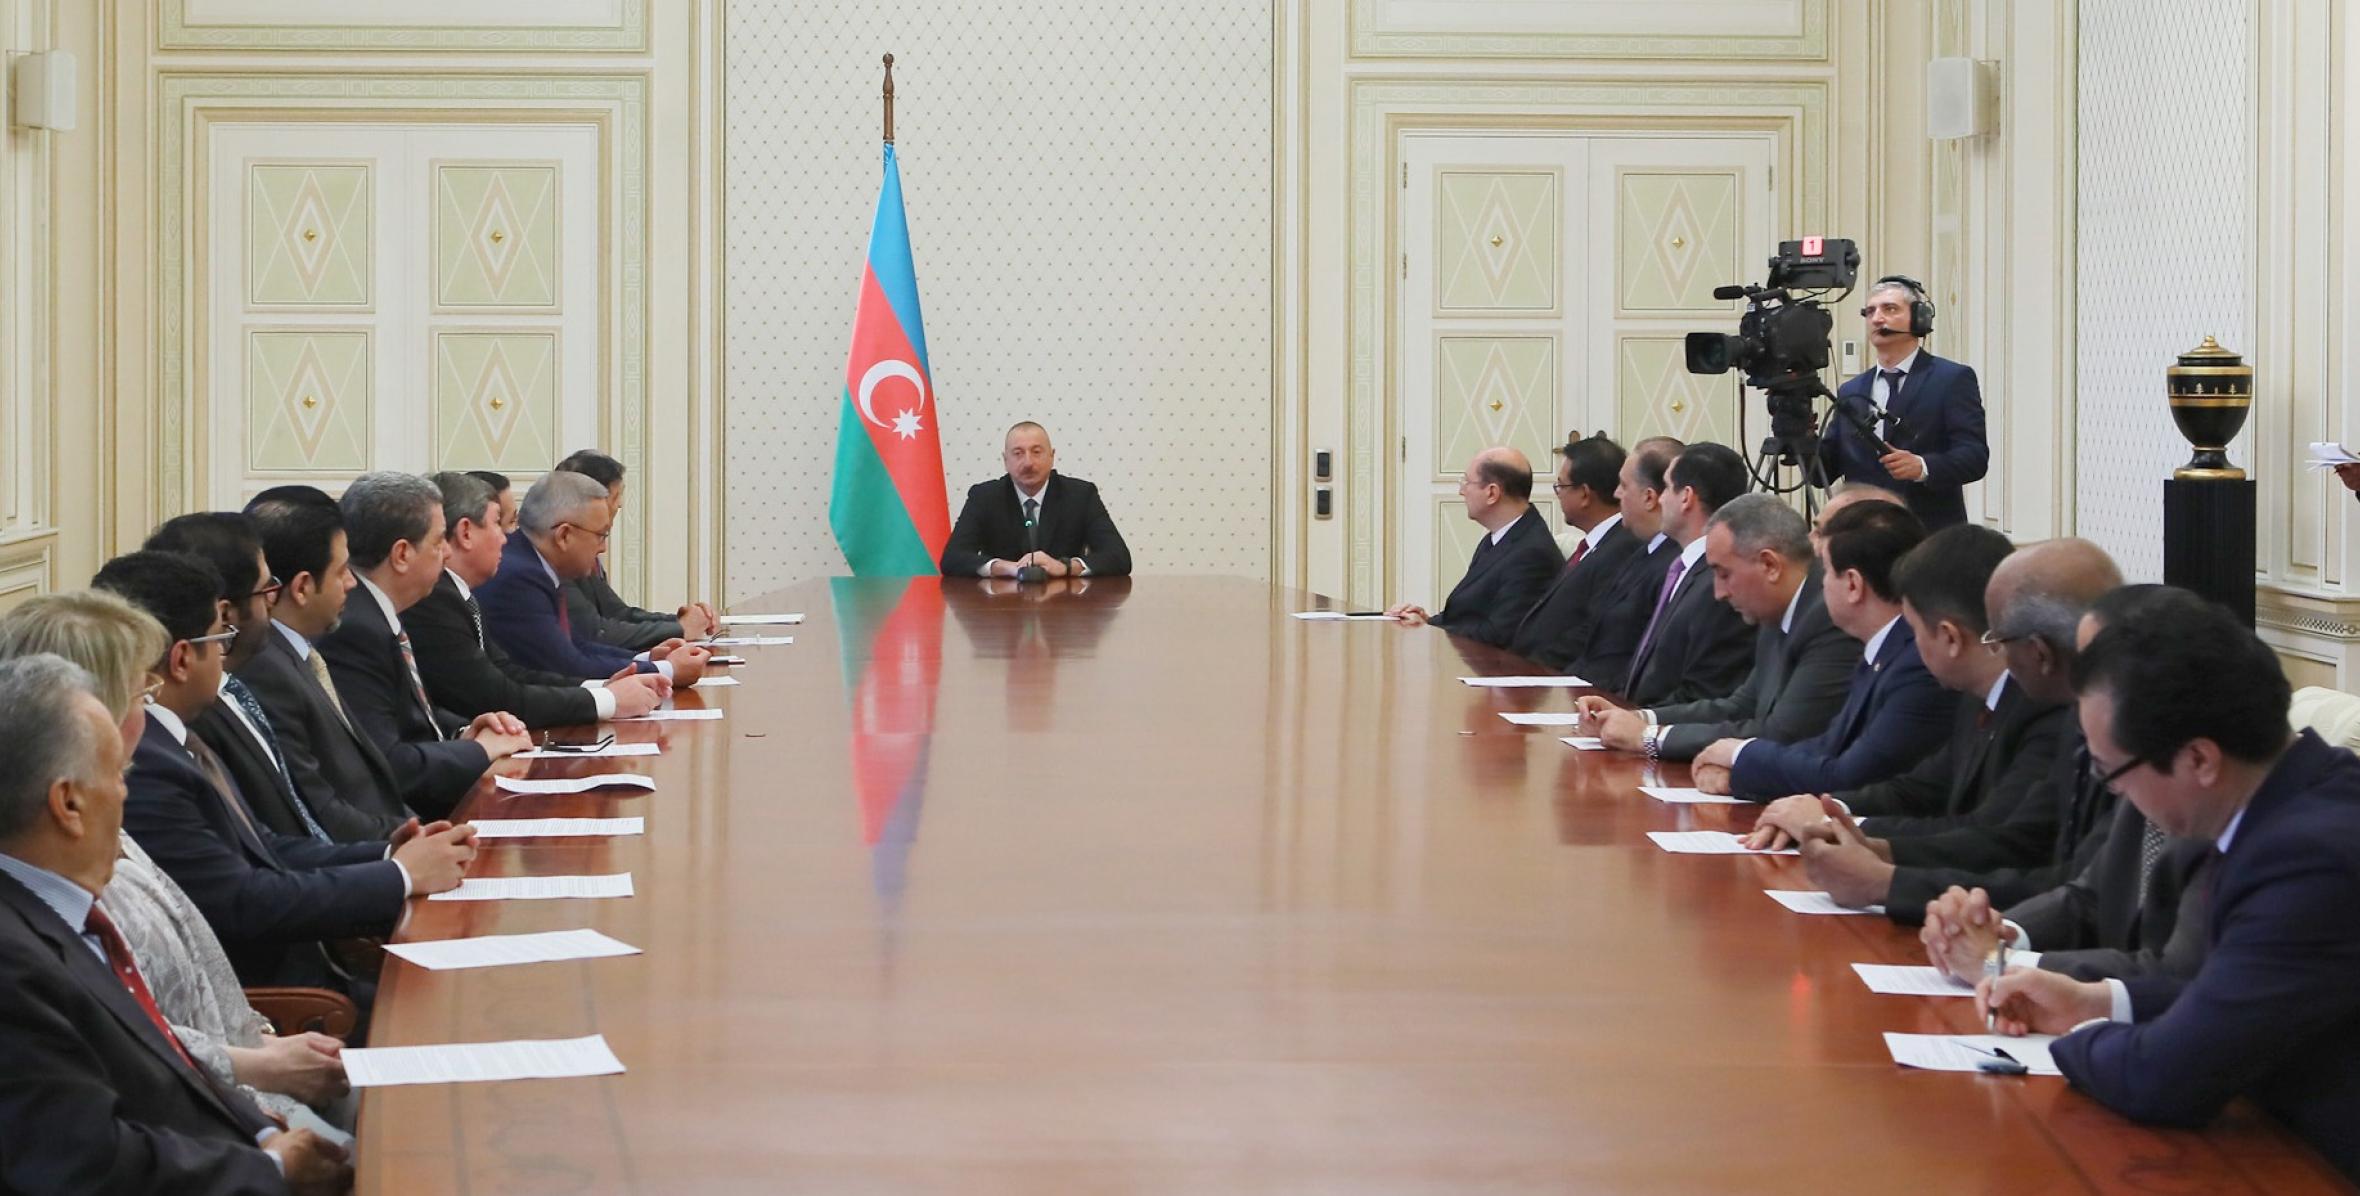 Speech by Ilham Aliyev at receptions of ambassadors and heads of diplomatic missions of Muslim countries in Azerbaijan